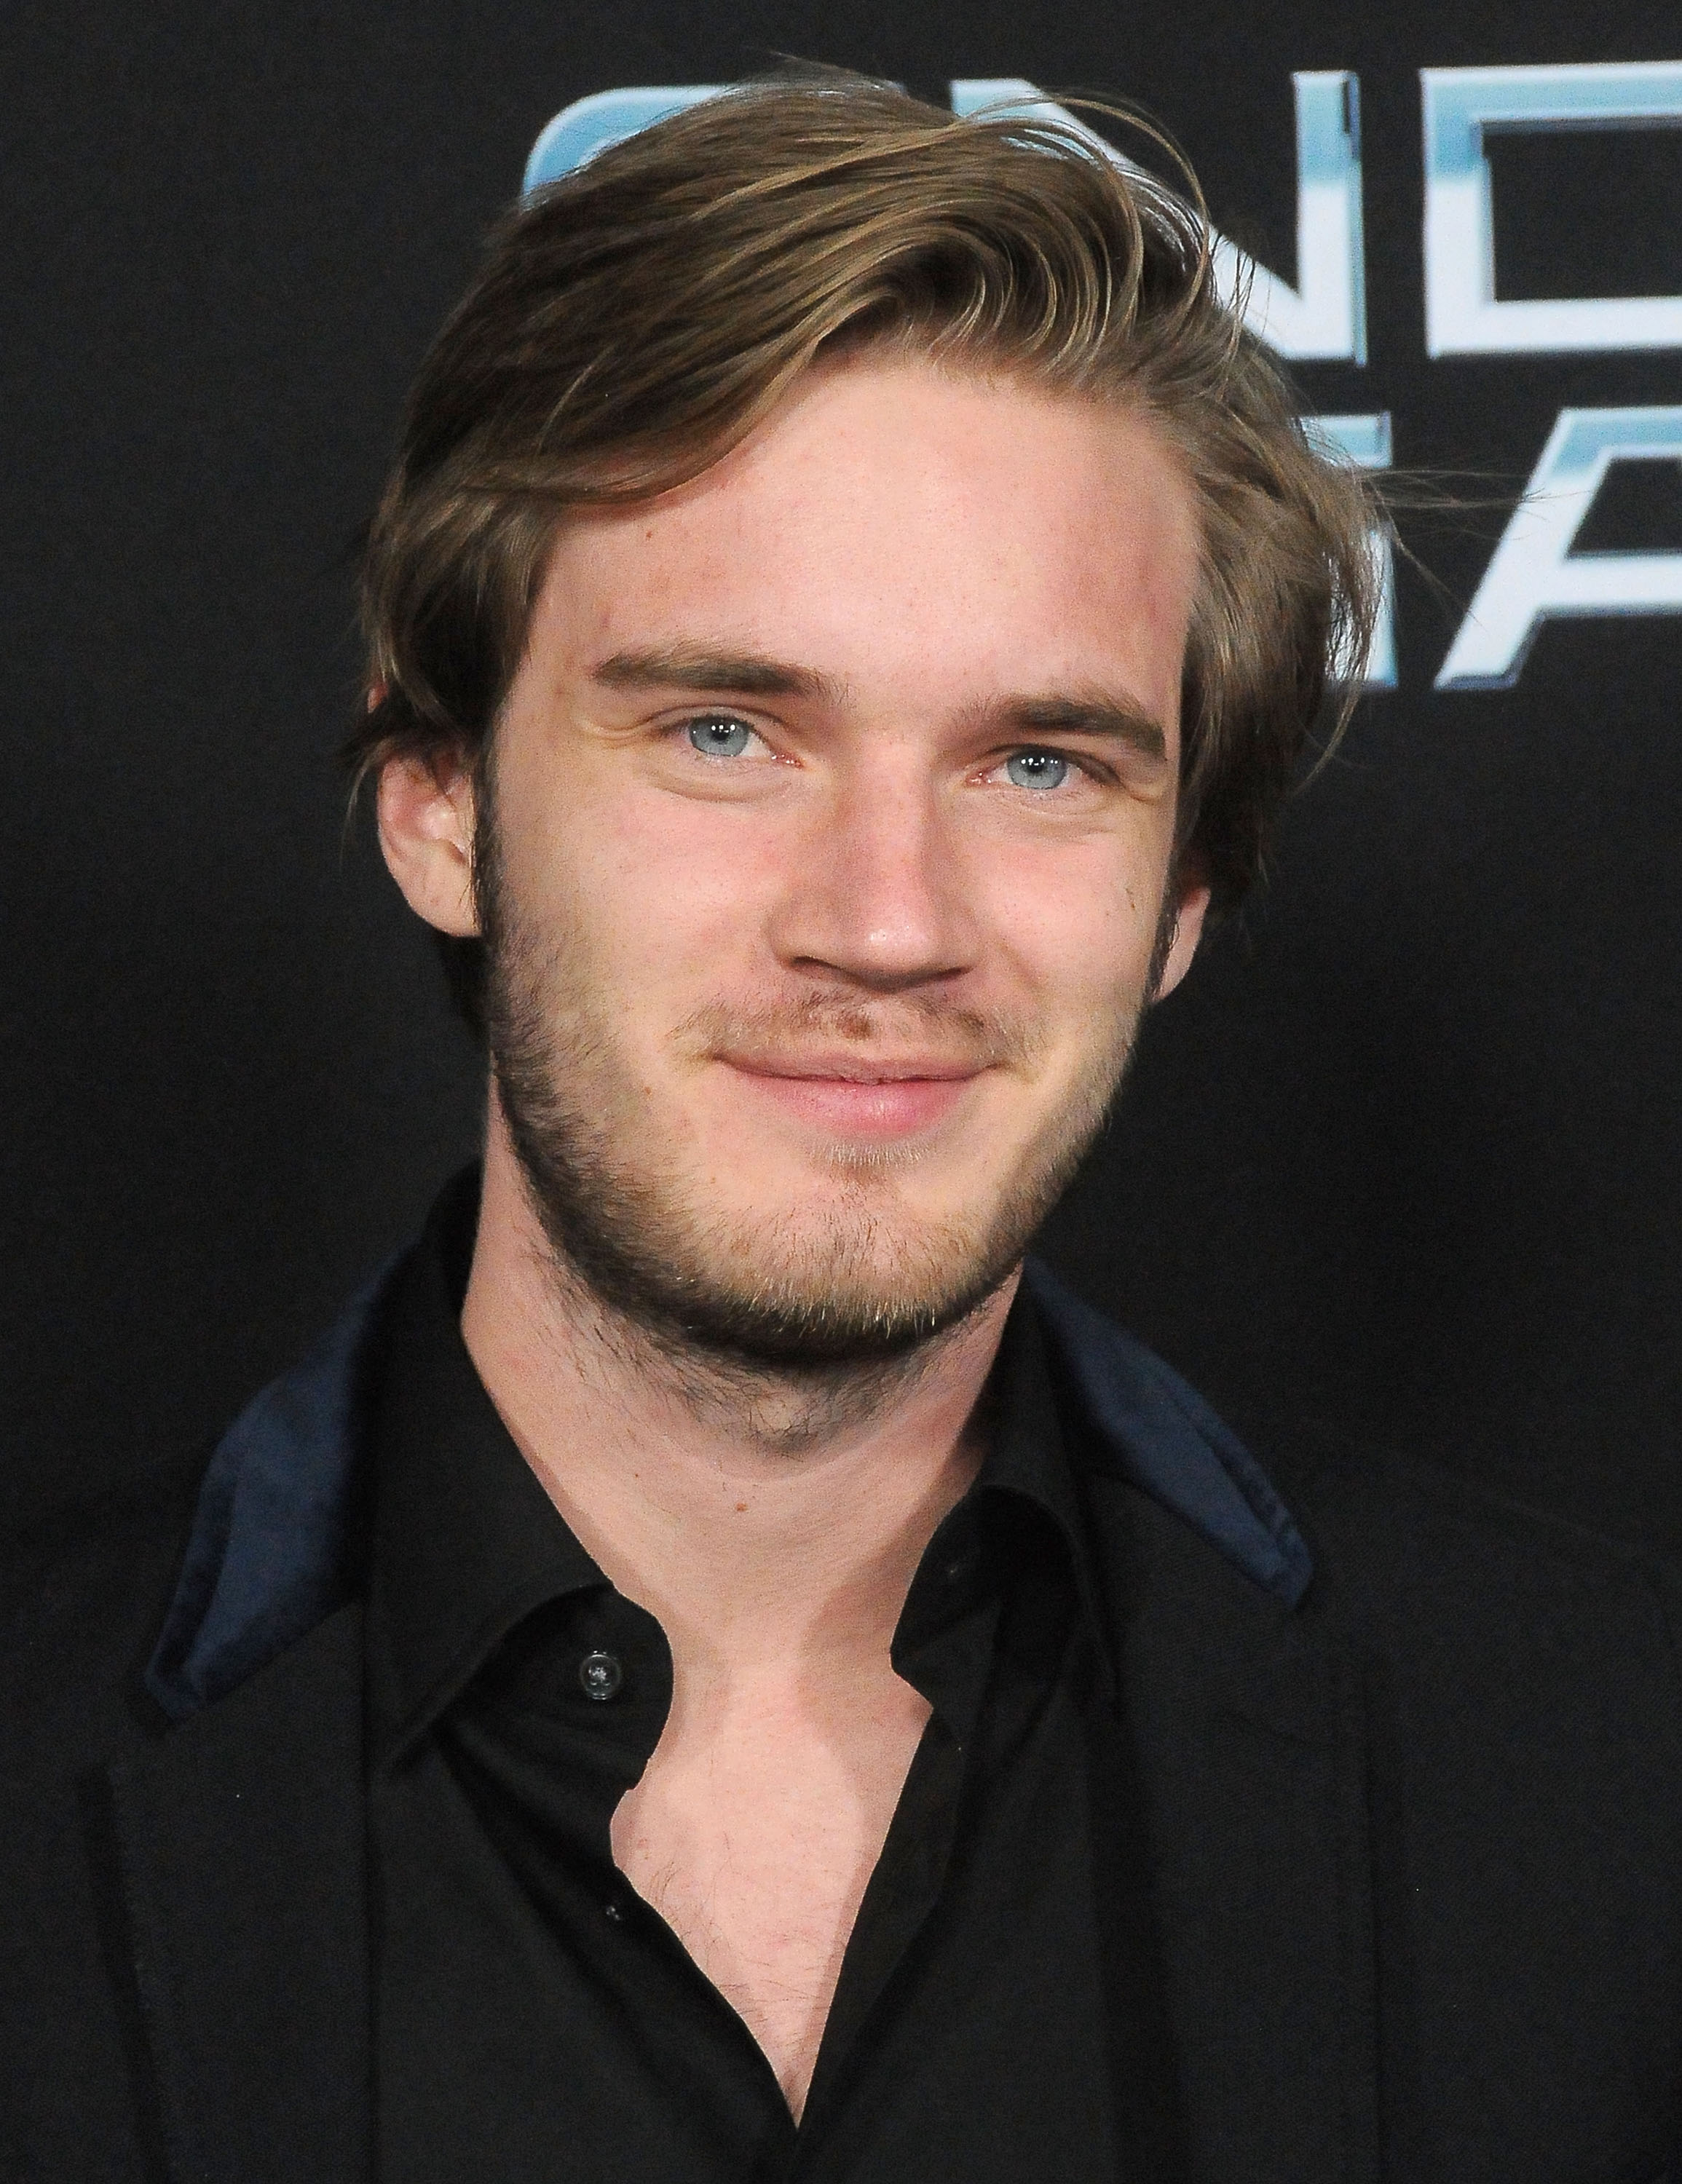 YouTube sensation Felix Arvid Kjellberg (a.k.a. PewDiePie) at the Los Angeles Premiere of "Ender's Game" in Hollywood on Oct. 28, 2013.